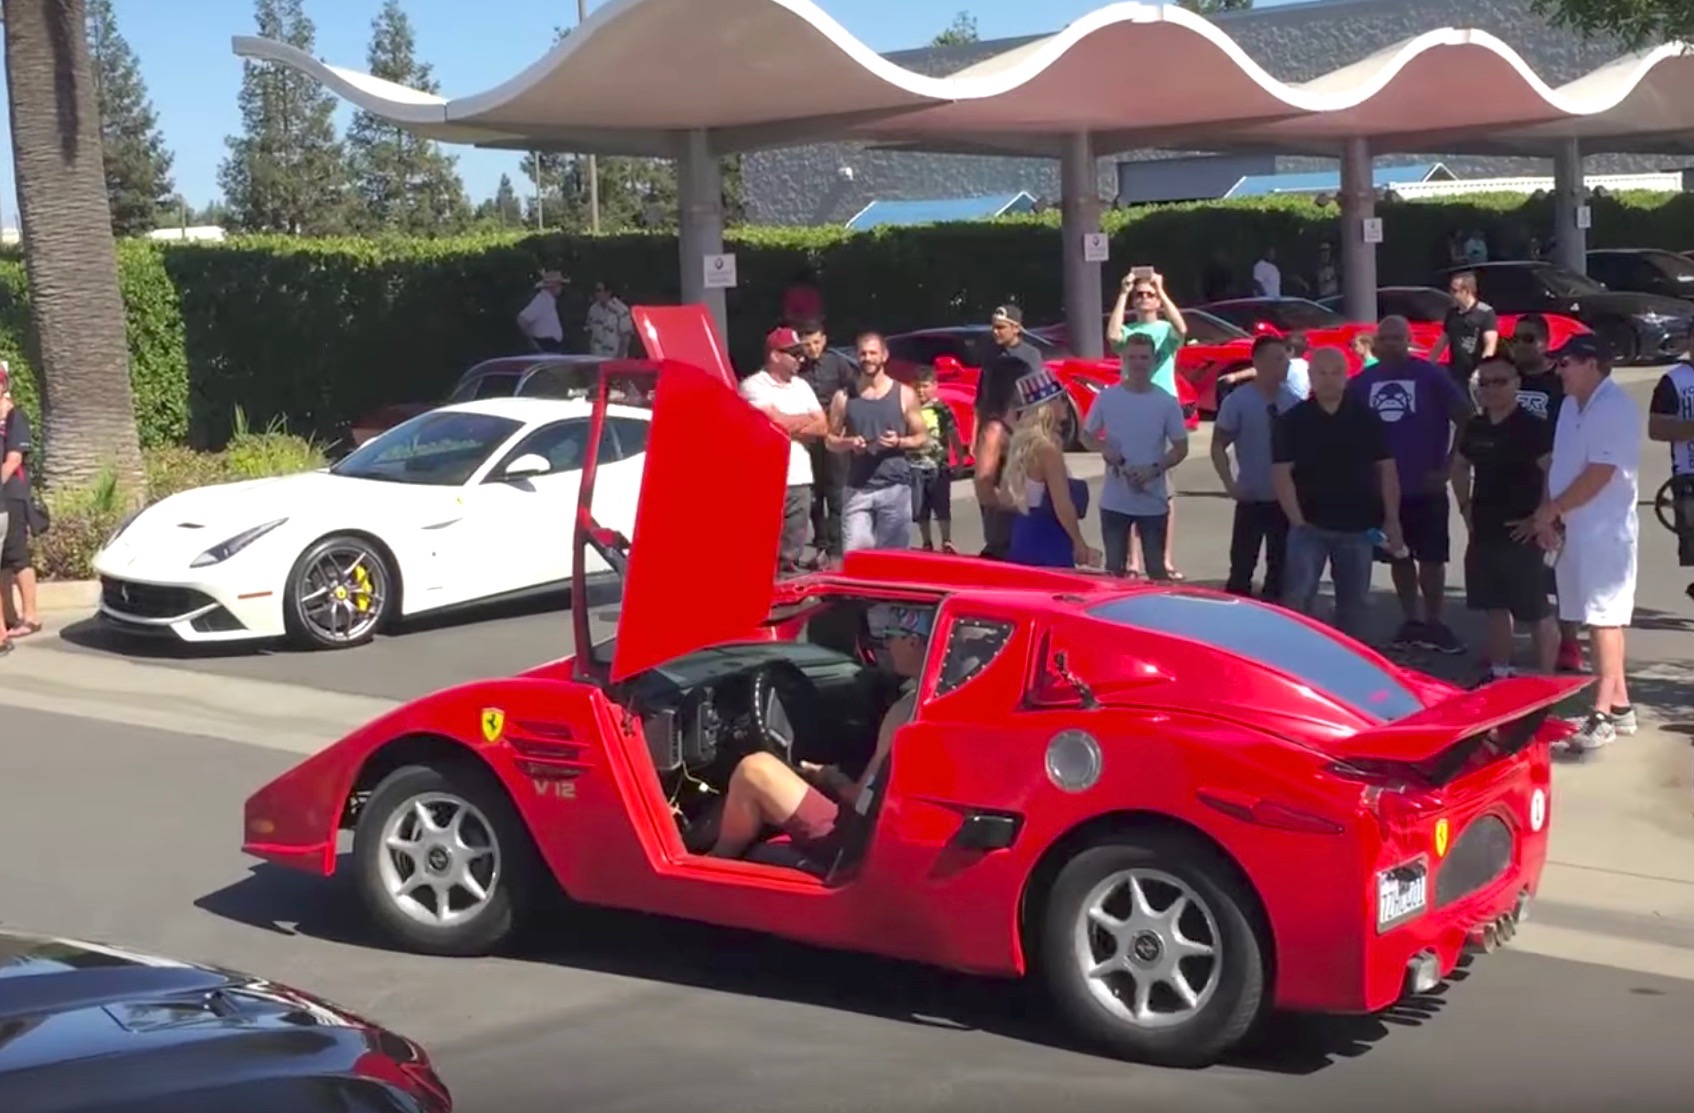 Funny video takes stab at YouTuber car reviews with fake Enzo